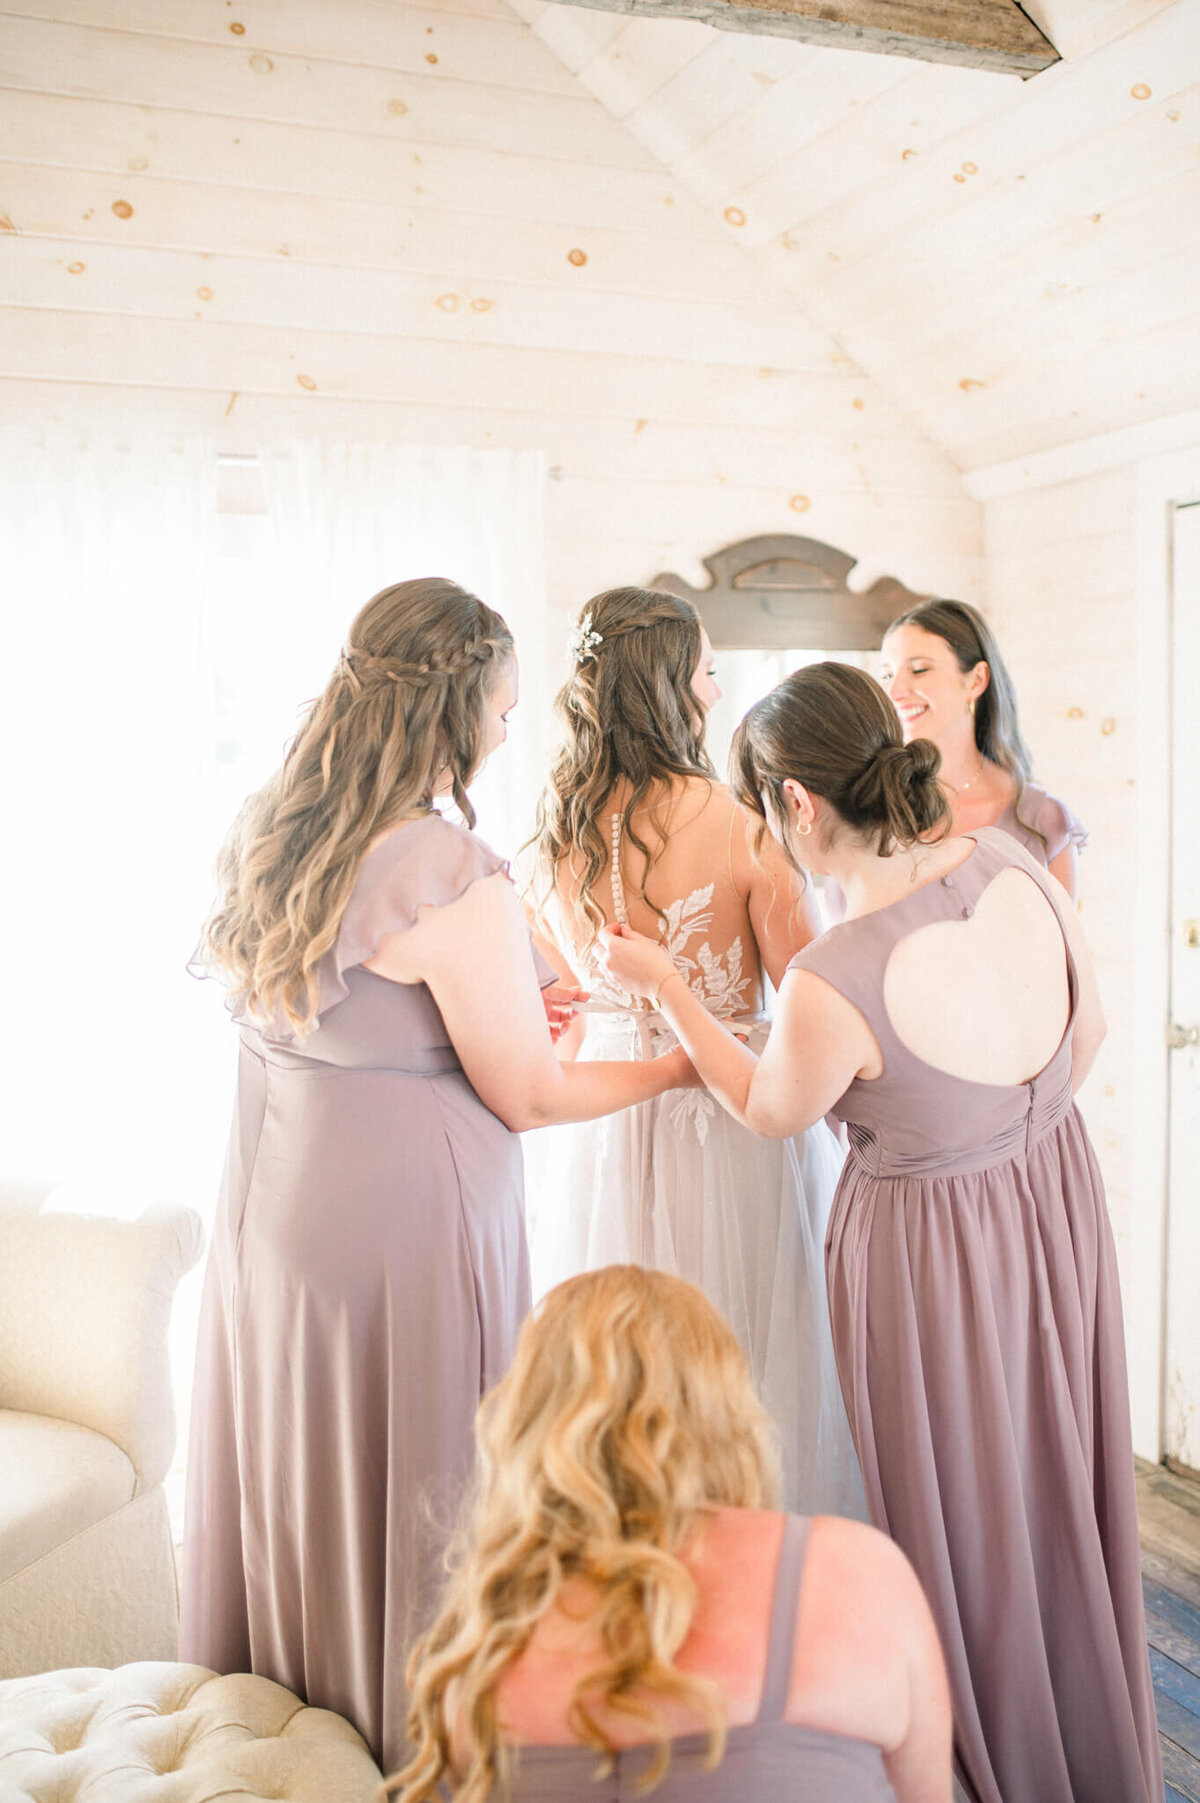 Bridesmaids helping bride adjust her dress one last time before the first look